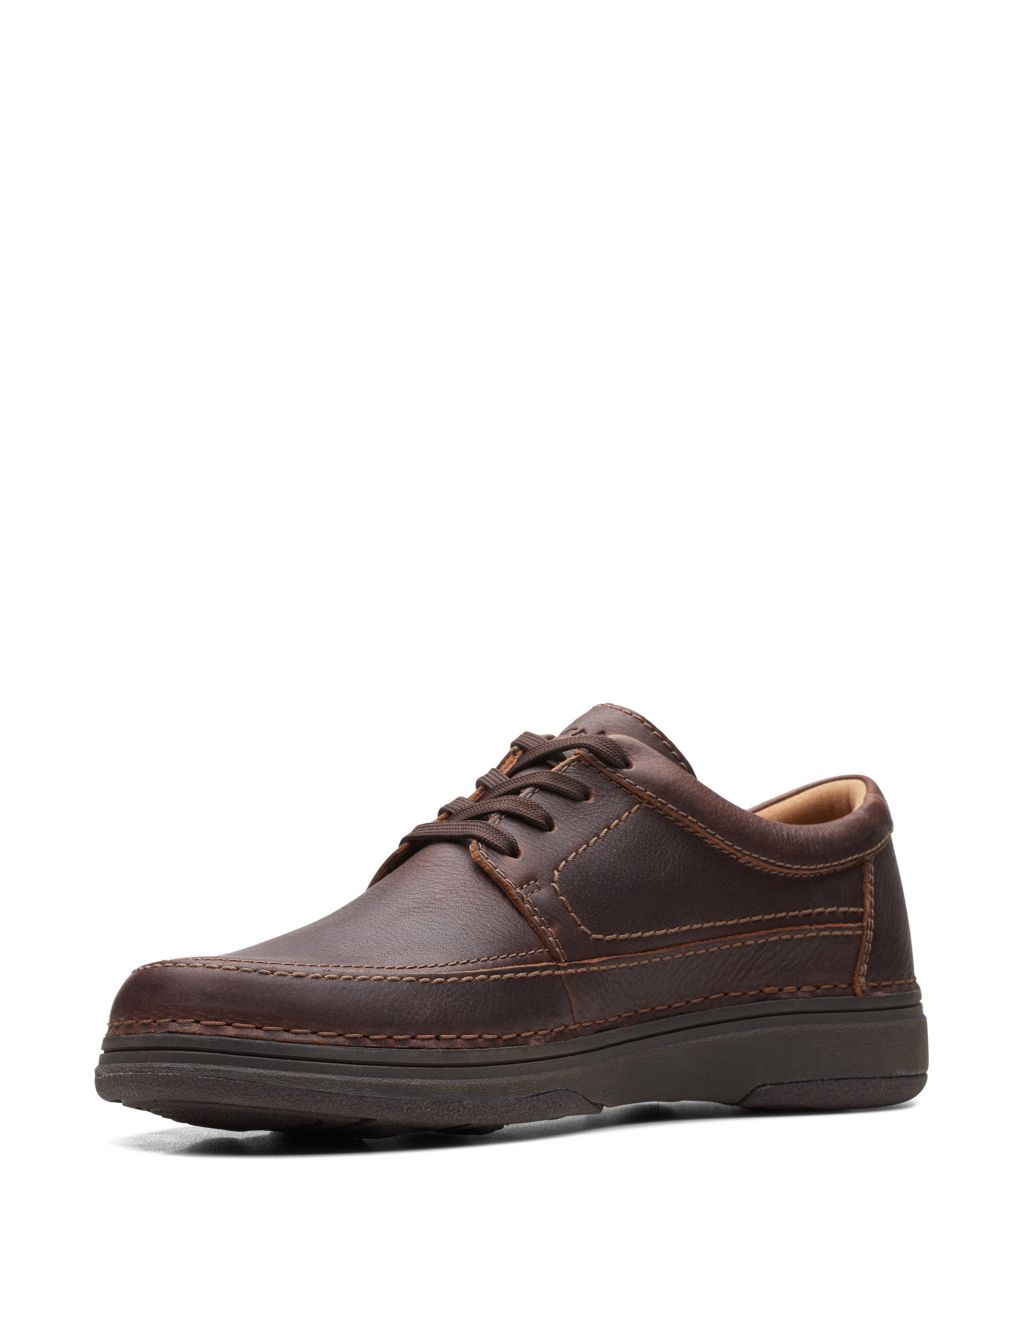 Wide Fit Leather Casual Shoes image 4